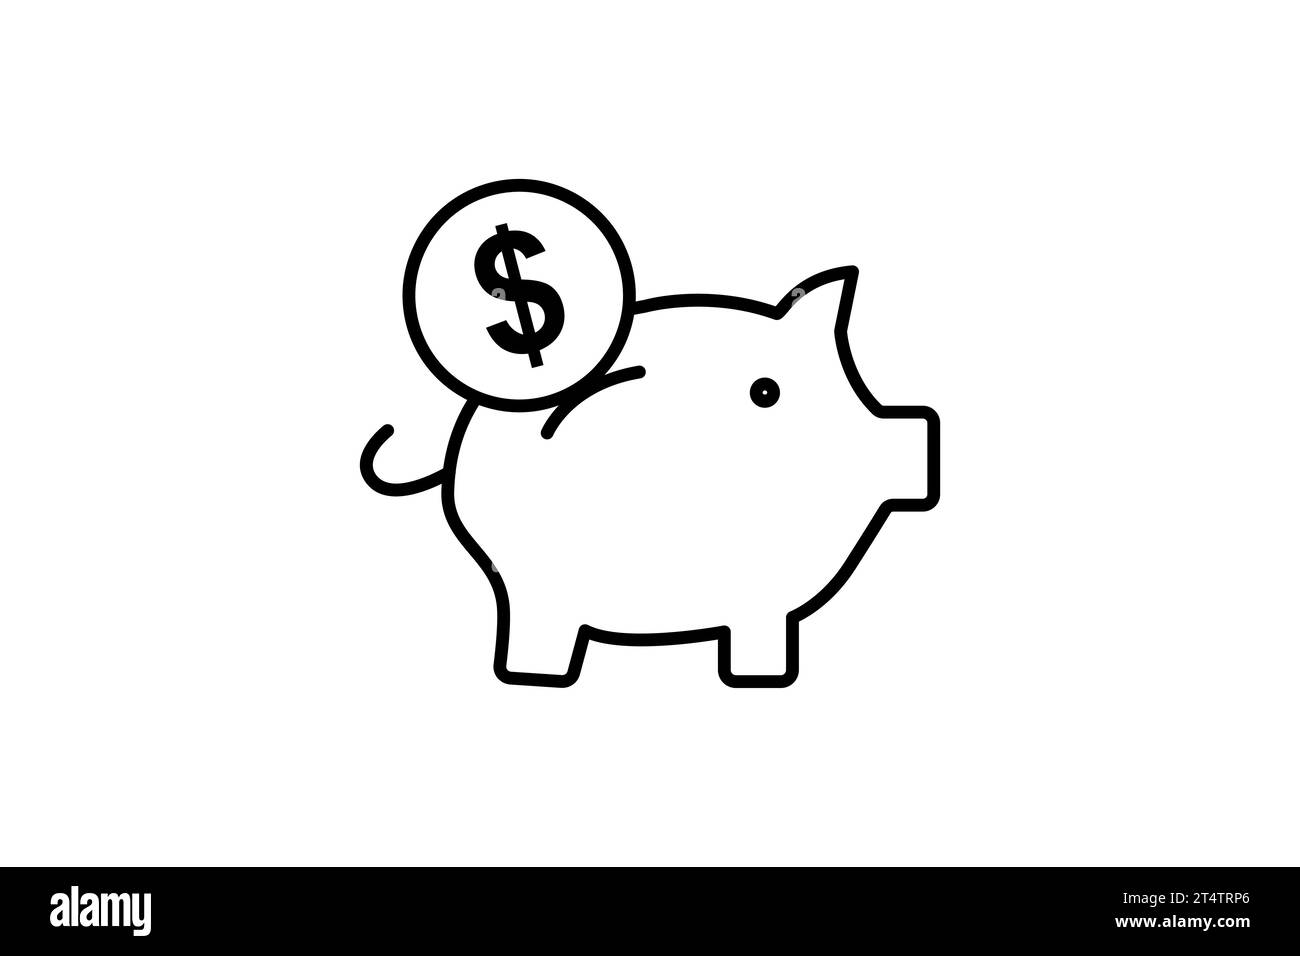 saving icon. icon related to investments and financial concepts. Line icon style. Simple vector design editable Stock Vector